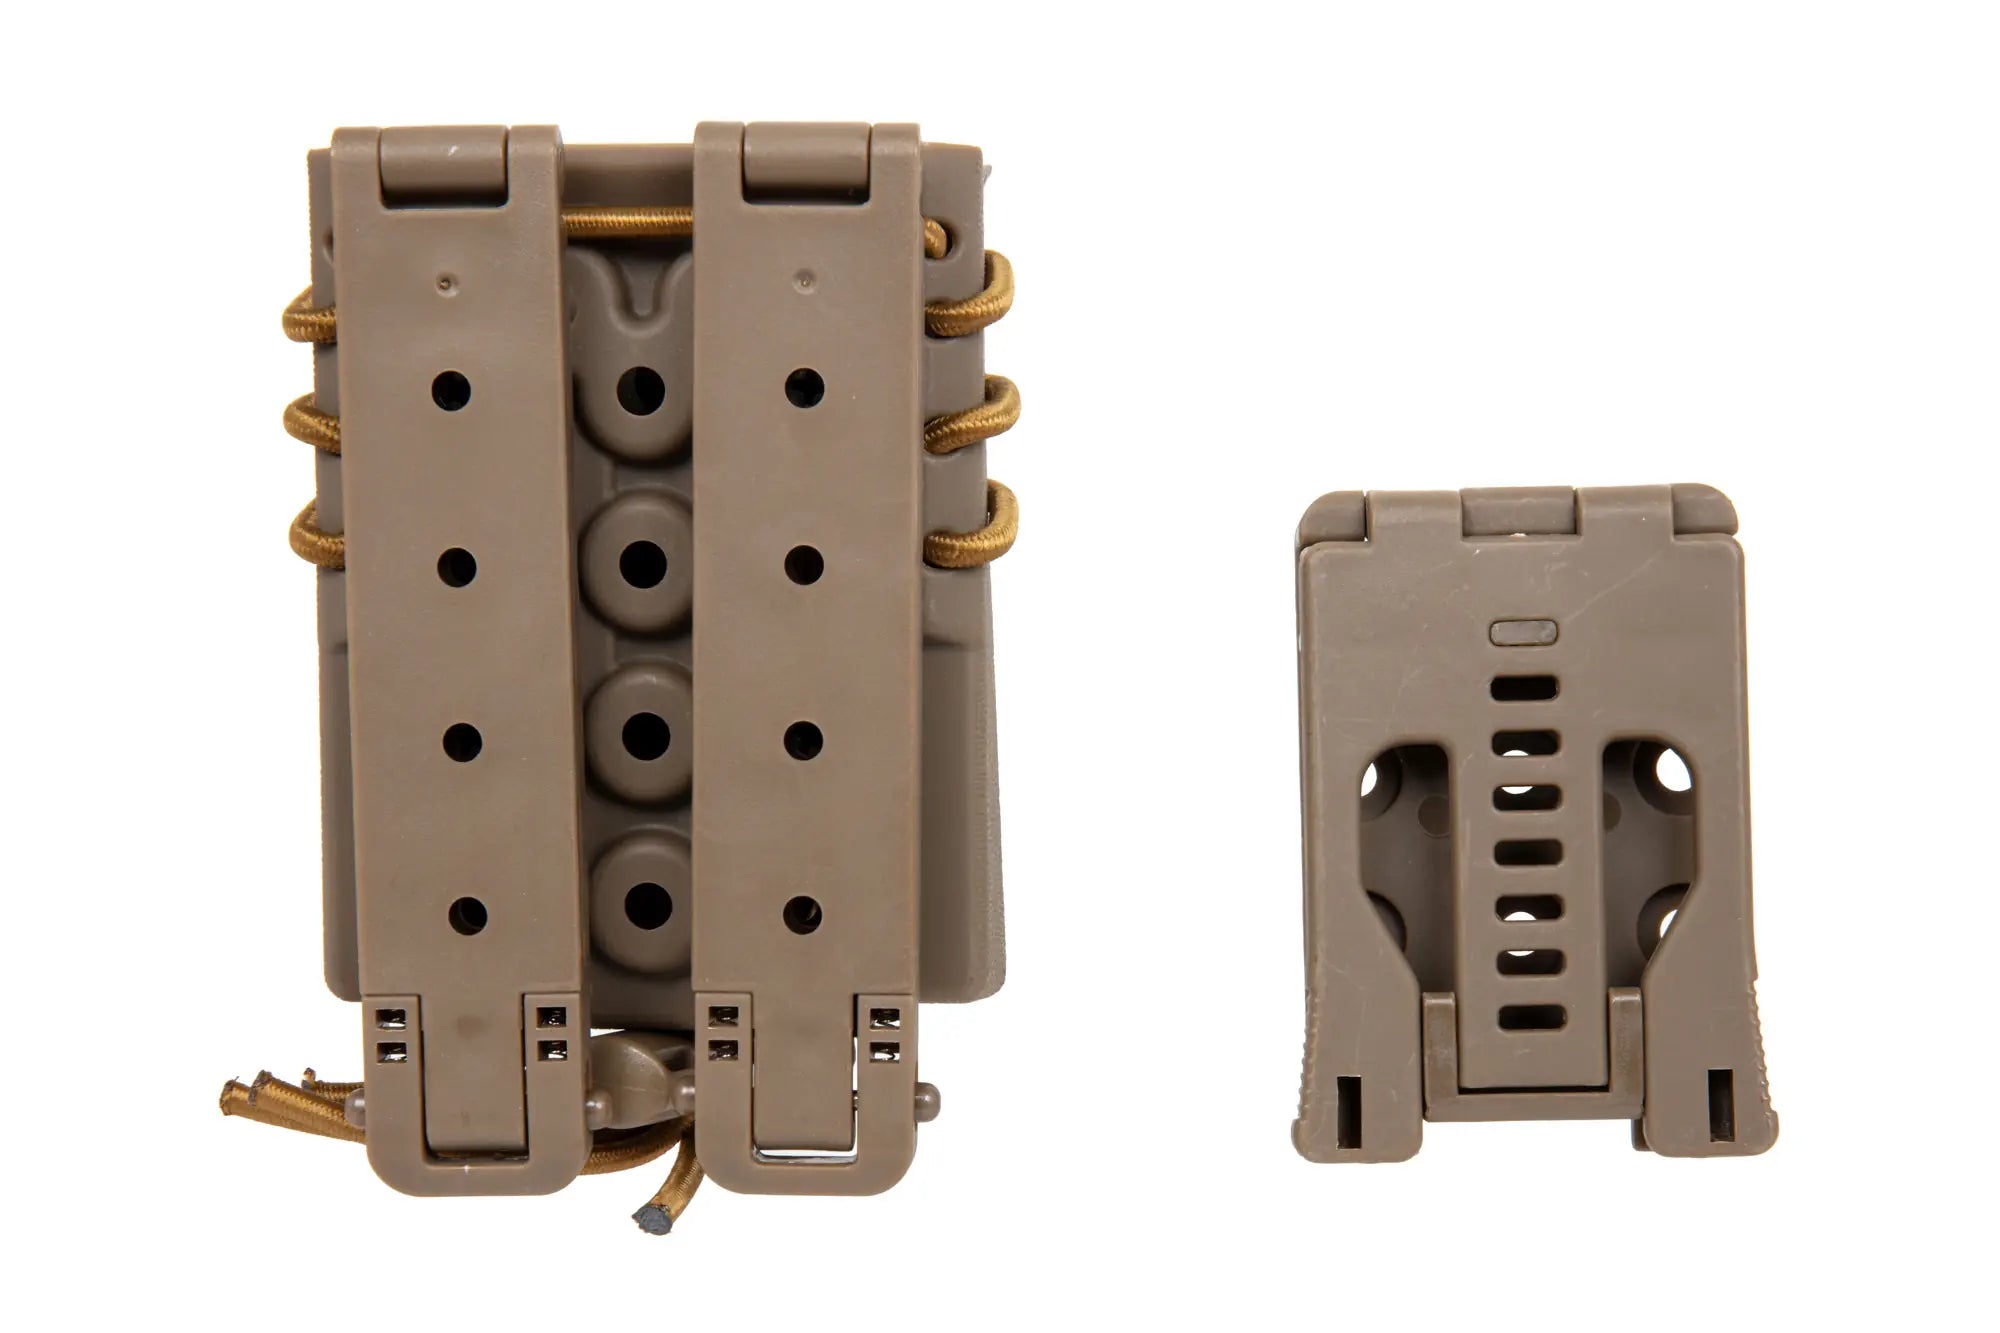 Carrier for 2 M4/M16 and 9mm magazines Wosport Urban Assault Quick Pull Tan-1